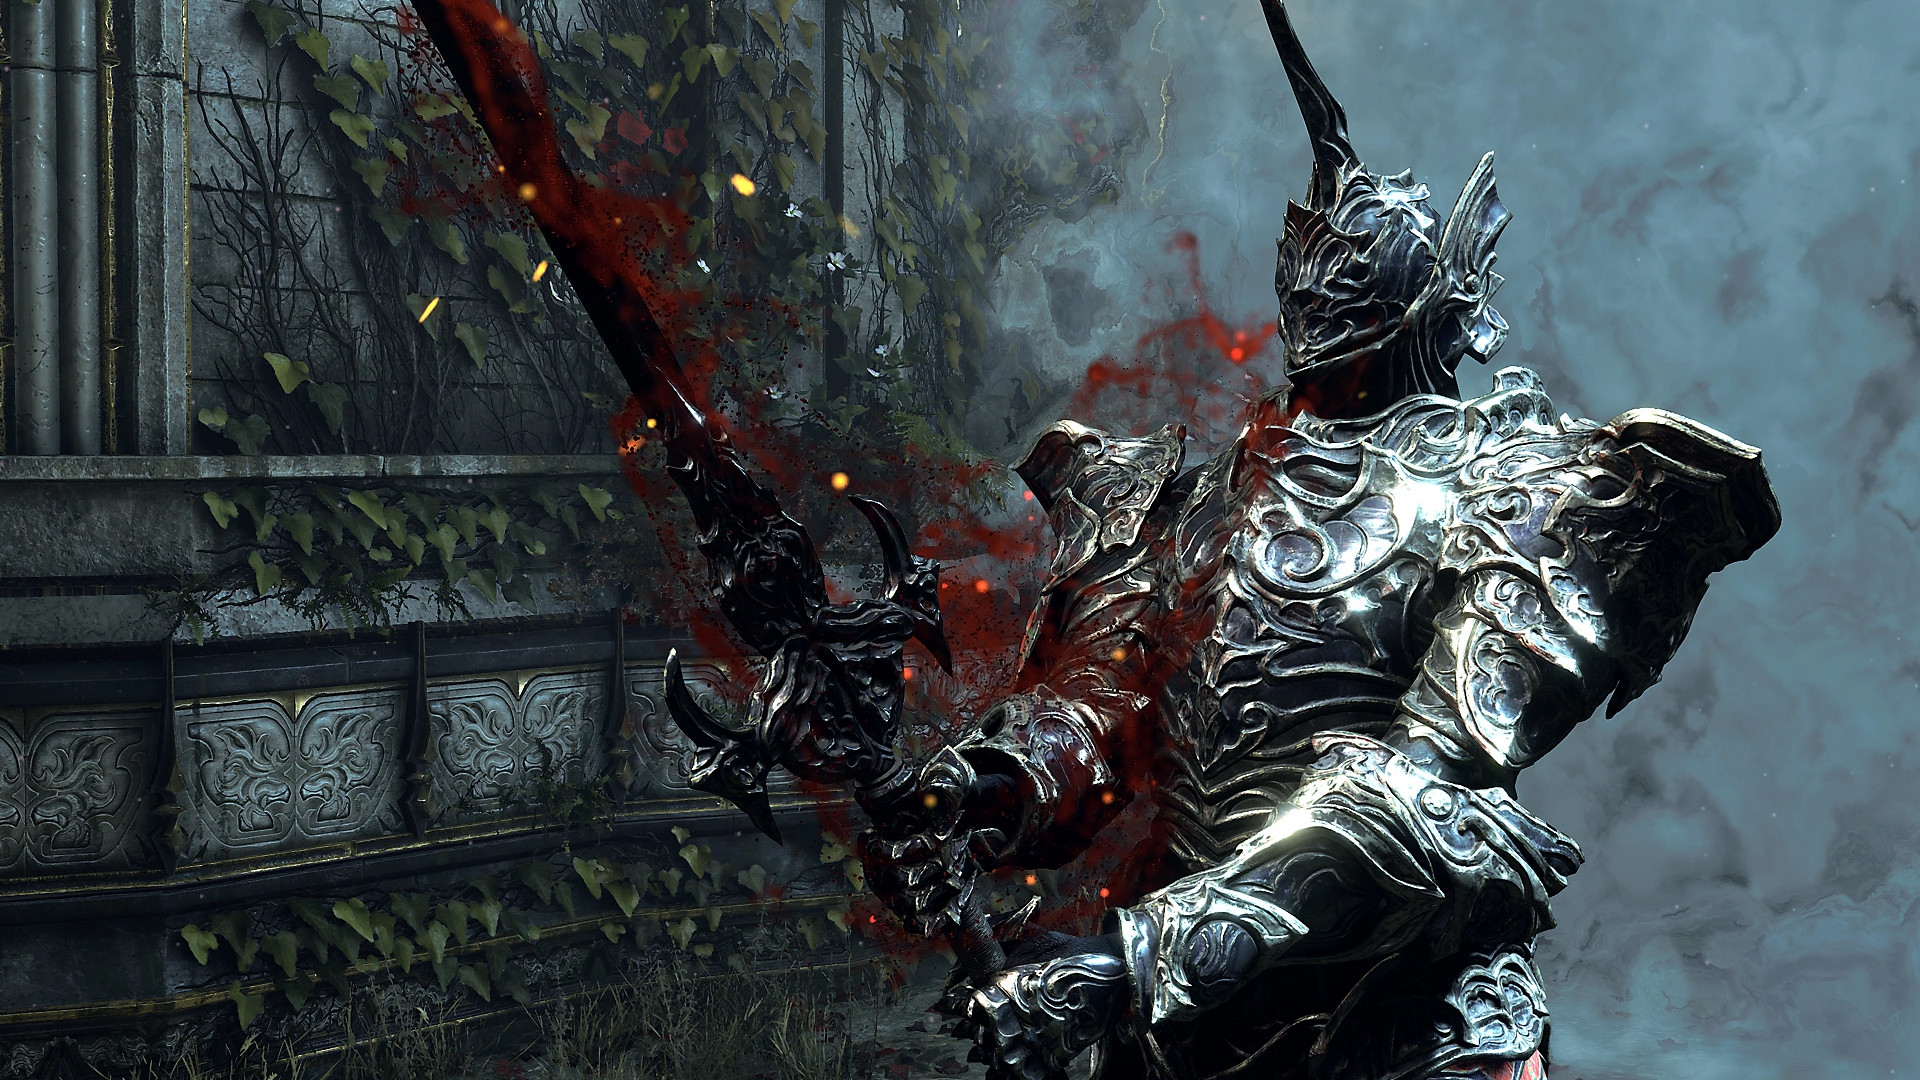 Video Games: The Best 'Dark Souls' Games Ranked - Bell of Lost Souls